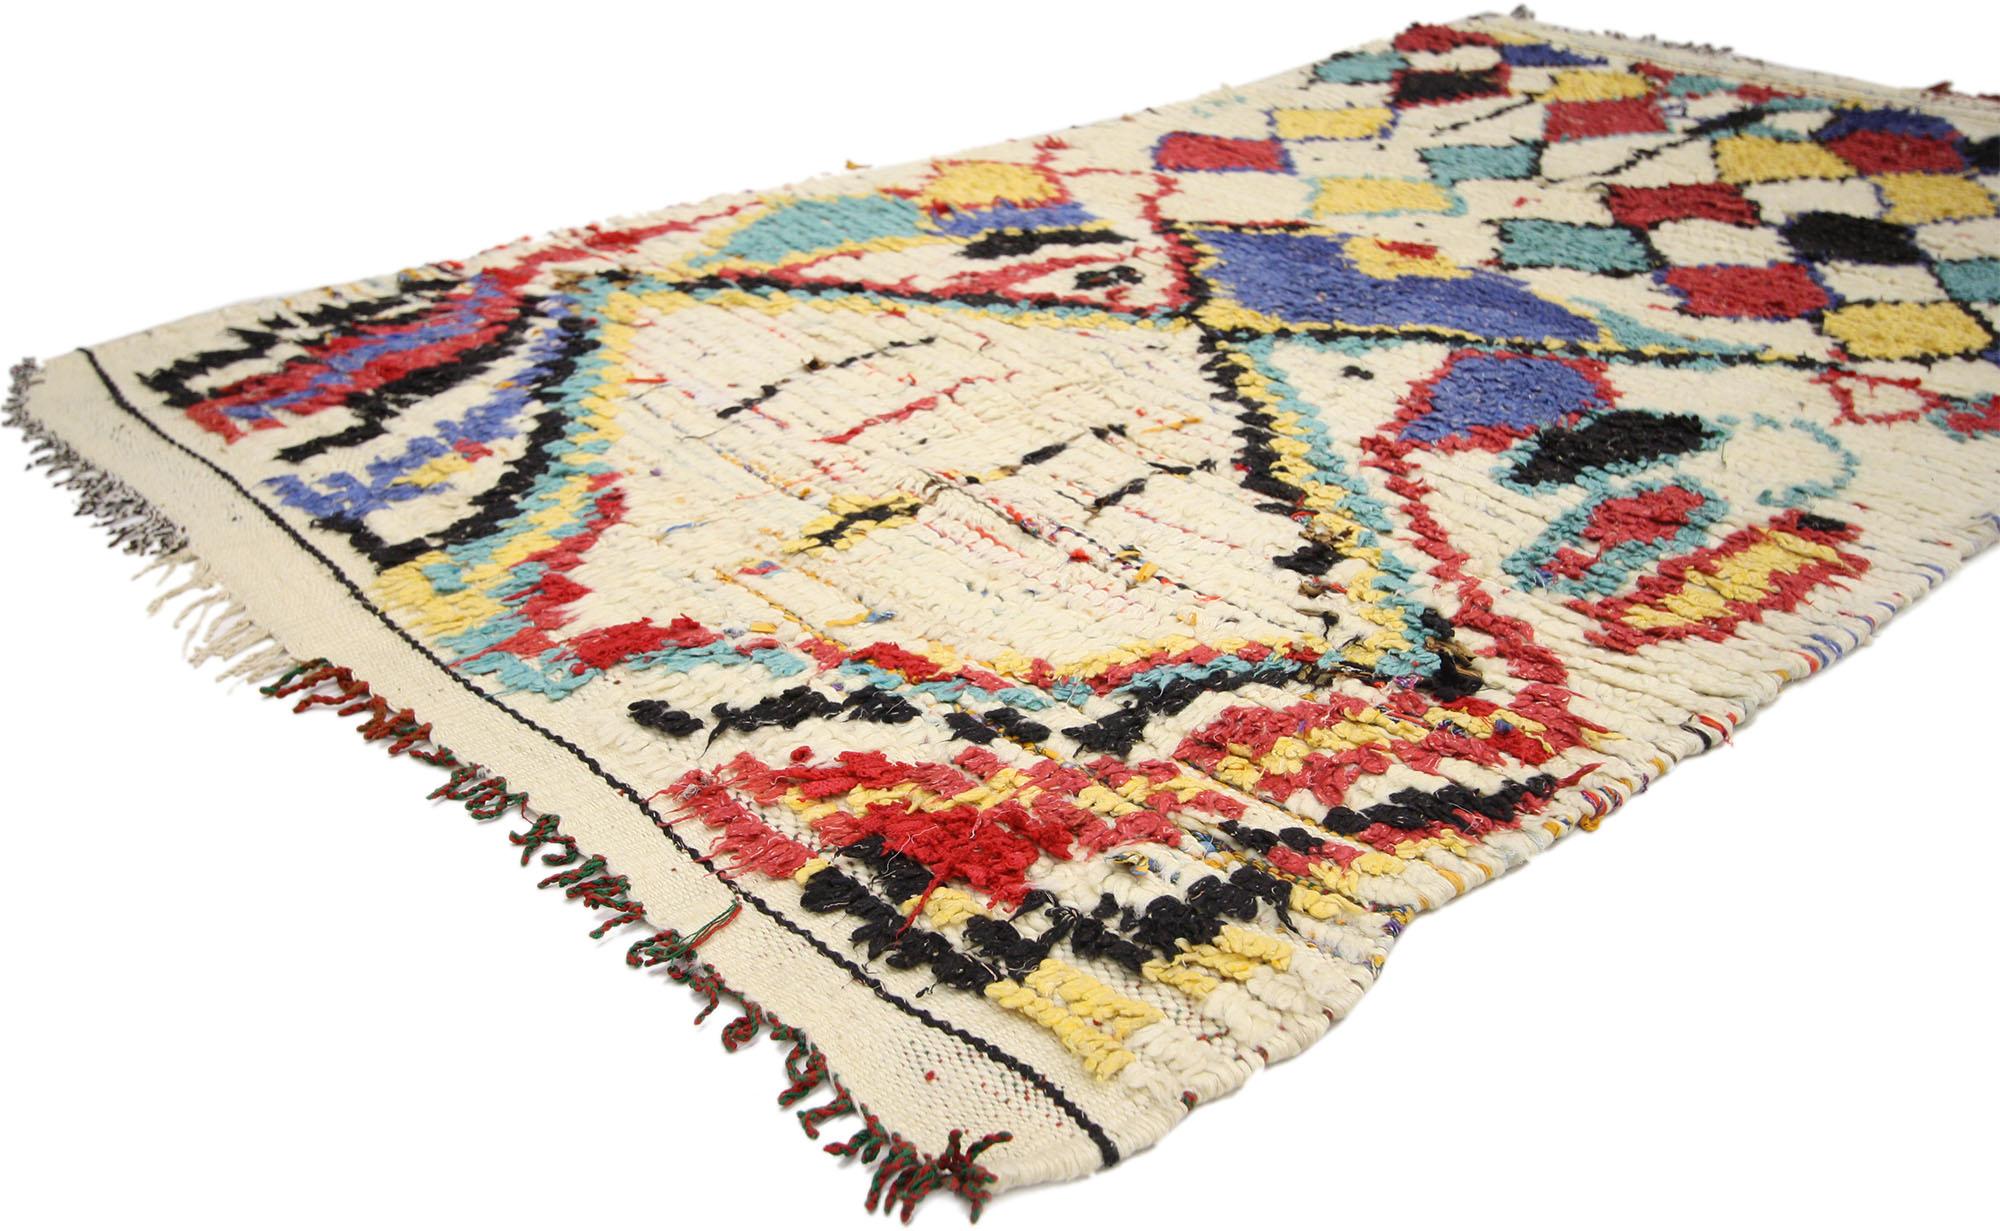 74525, vintage Moroccan Azilal rug, Tribal style Berber Moroccan rug. This vintage Moroccan Azilal rug marries the vintage style of the Berbers with a vivacious color scheme geometric design that is a contemporary style. The Moroccan Azilal rug is